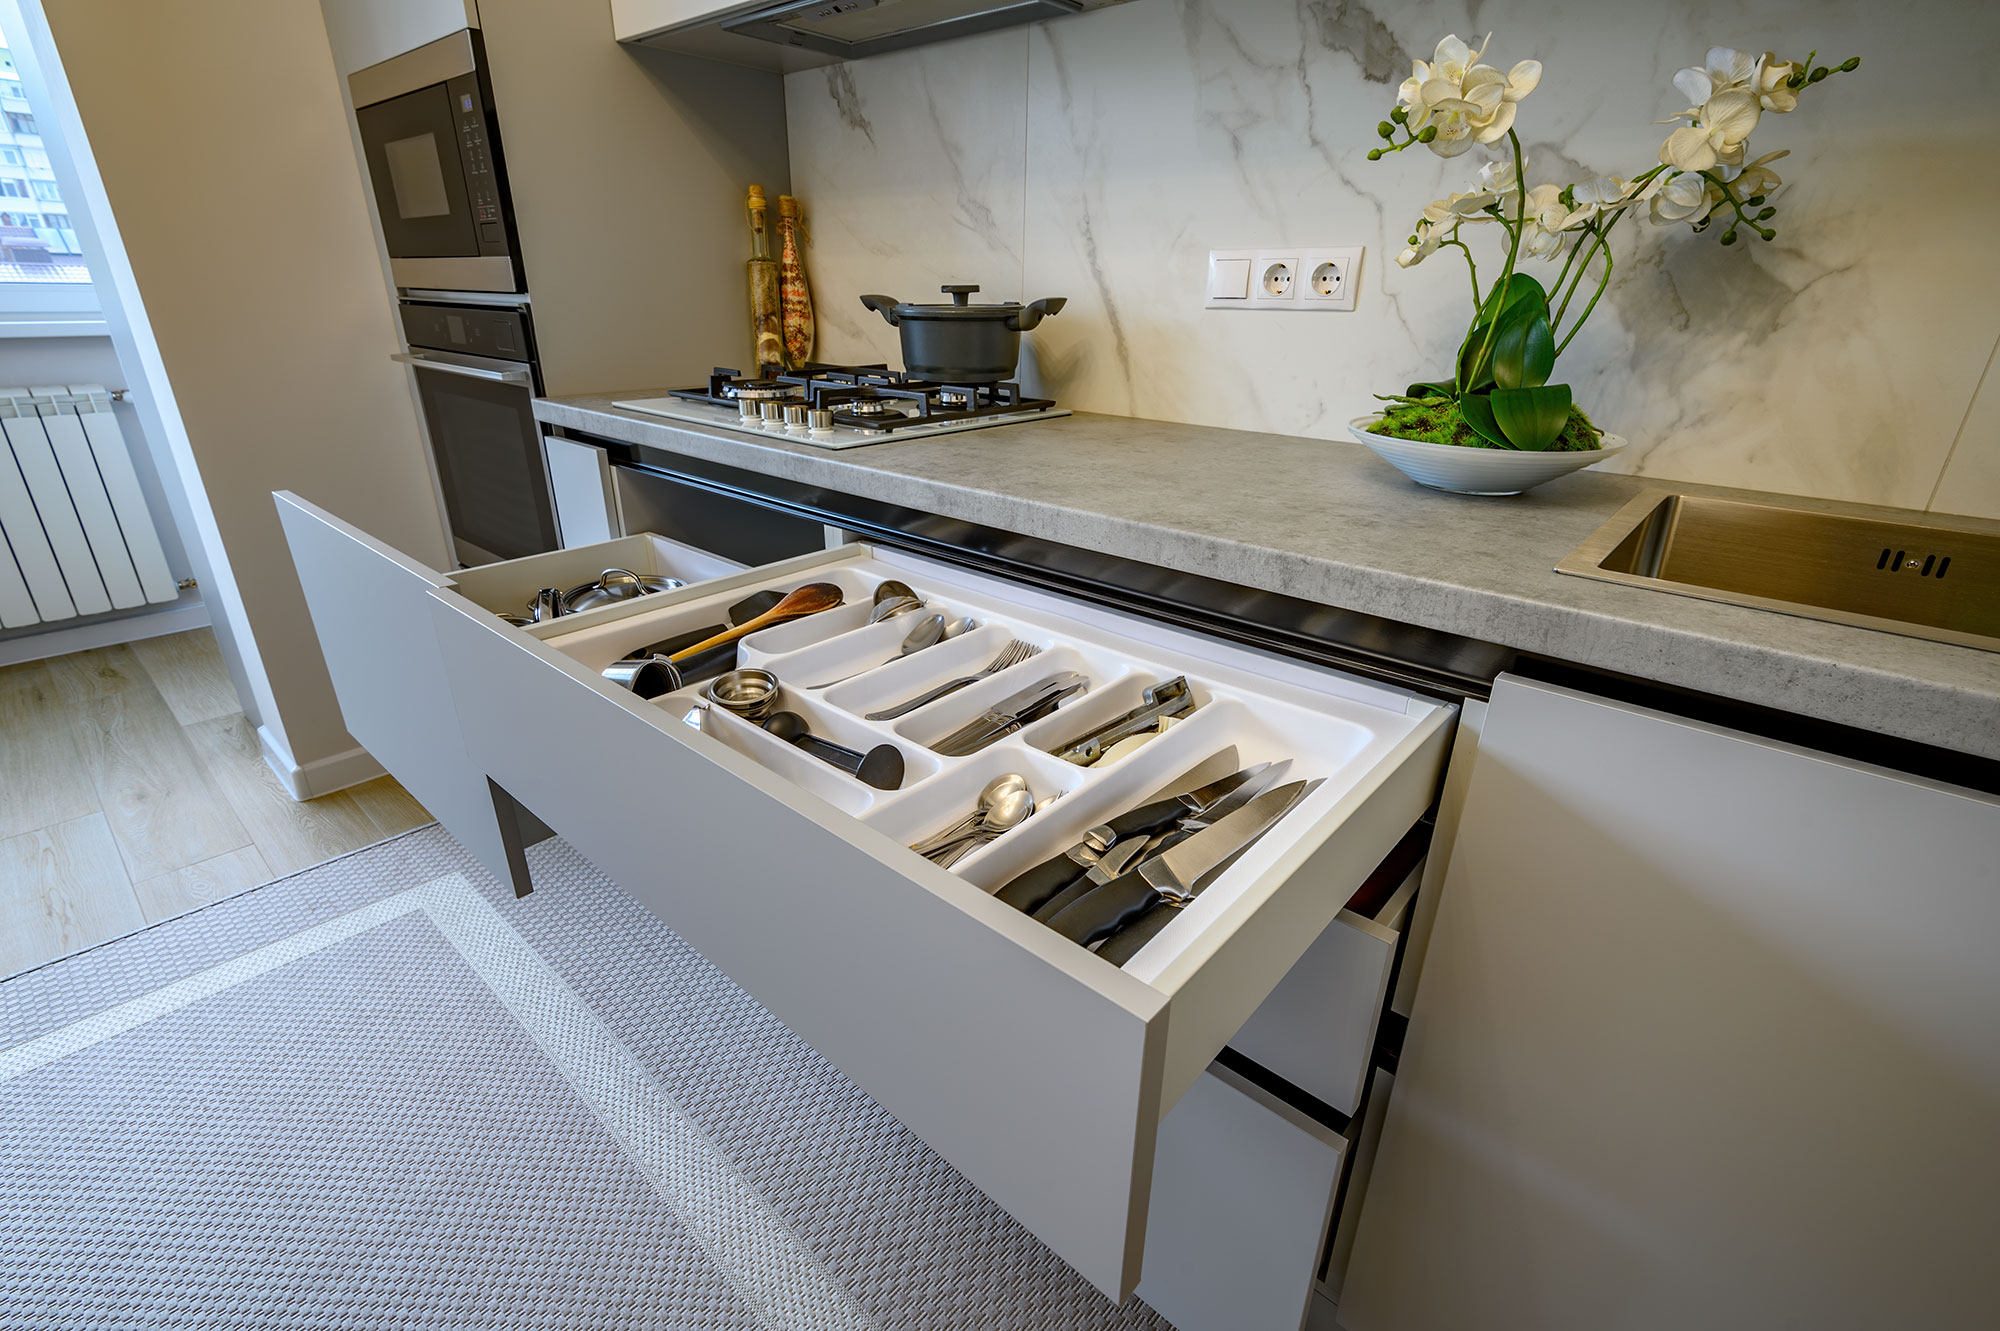 Effectively Use Corners with Kitchen Storage Carousel